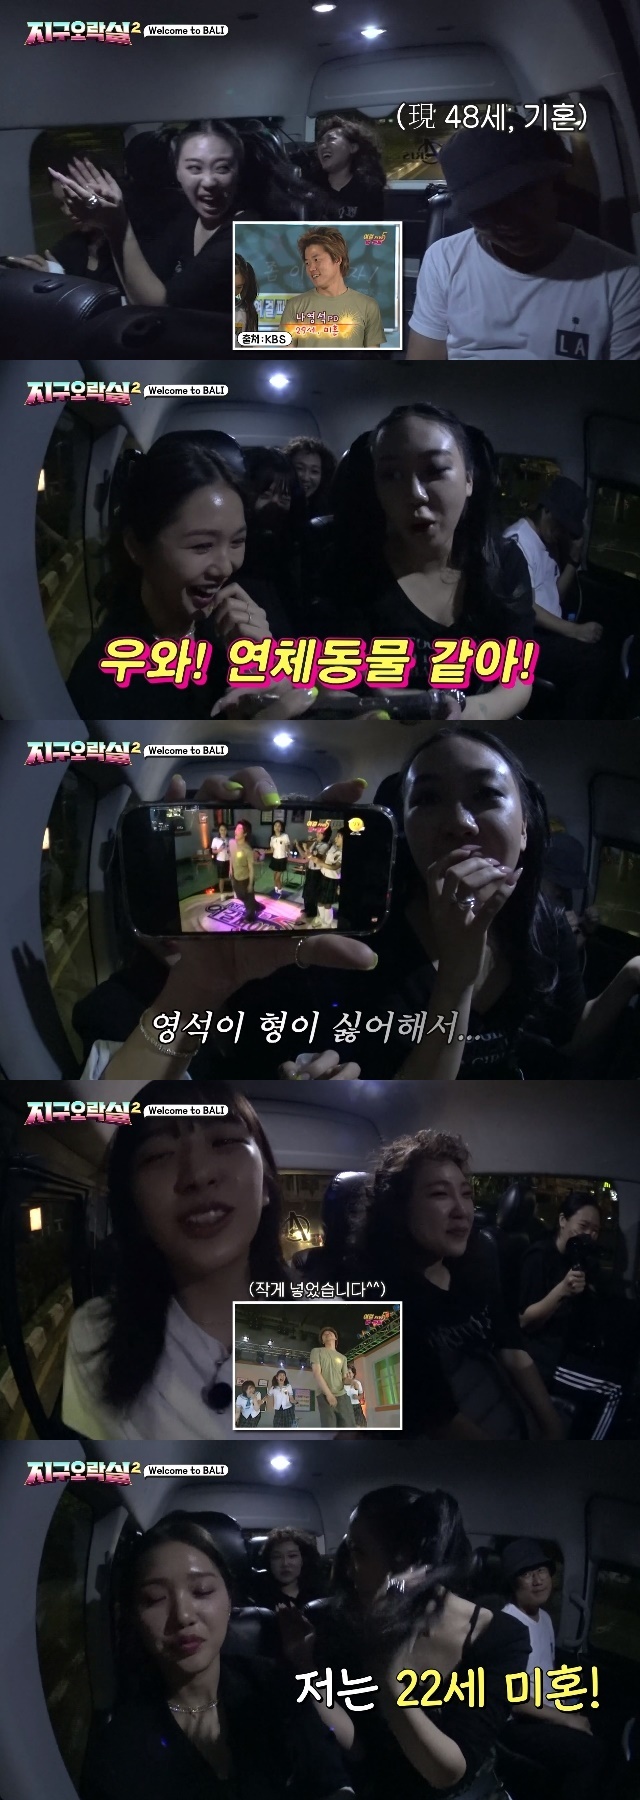 Producer Na Young-seoks past has been reduced to ridicule.In the seventh episode of tvN Entertainment  ??? Earth Game Room 2 (hereinafter referred to as Garak Room 2), which was broadcast on June 23, the past of Na Young-seok PDs first appearance on the show was revealed.On this day, the members talked to the PDs of Garak Room 2 and expressed their curiosity, Please tell me the genealogy of the PD and Is it based on the appearance on the screen (sharing the generation)? Then Ahn Yu-jin said, When is PDs first appearance?Is it one night and two days? Na Young-seok began to make a full-fledged tease.After a testimony from a production crew, It is not 1 night and 2 days, Na Young-seok PD recalled that his first broadcast was Girl Five without guessing his future.At this time, the younger PD provided the members with gold information, saying, It comes out when I search. The members took out their cell phones on the spot and started searching. The younger PD added a hint of Twenty-nine Na Young-seok.Na Young-seok, who was seriously embarrassed, tried to stop it by saying, Down with your cell phone! But Ahn Yu-jin eventually found the video.Na Young-seok PD, who had a similar head to Lee Eun-ji now, was introduced as Na Young-seok PD 29 years old unmarried and laughed.In addition, Na Young-seok PD showed dance, and Lee Young-ji asked Please put this material screen with Mollusca.Lee Young-ji and Lee Eun-ji repeatedly teased Na Young-seok PD, saying, I can not follow this. It looks like Mollusca and I used to go to clubs in the old days.